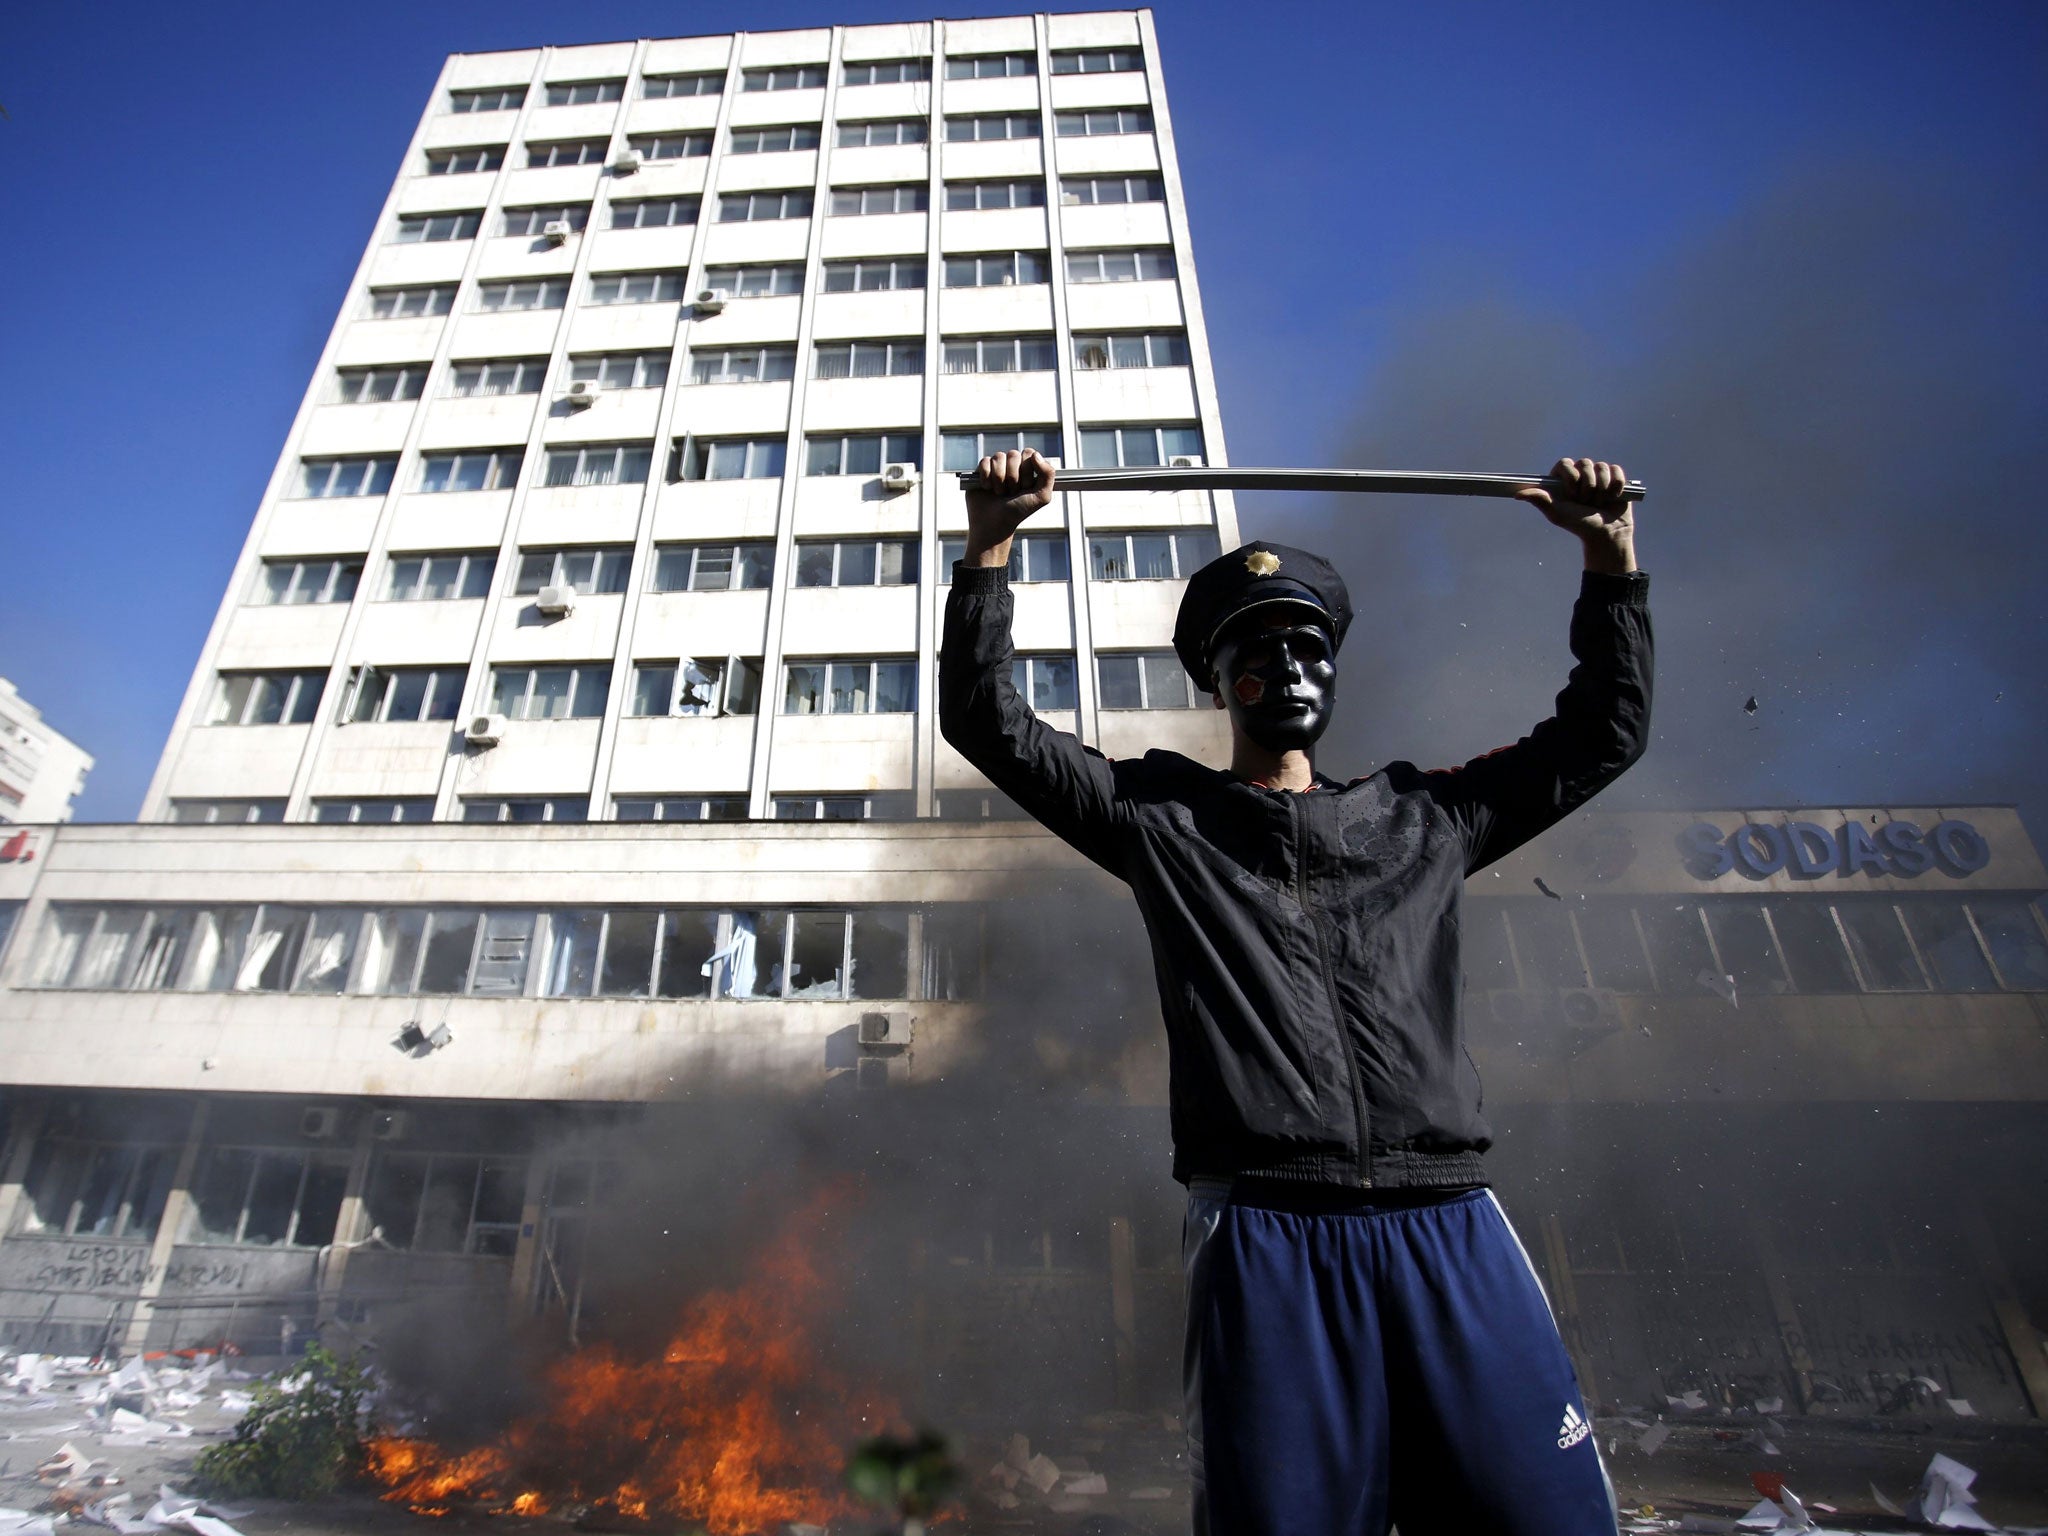 A protester stands near a fire set in front of a government building in Tuzla